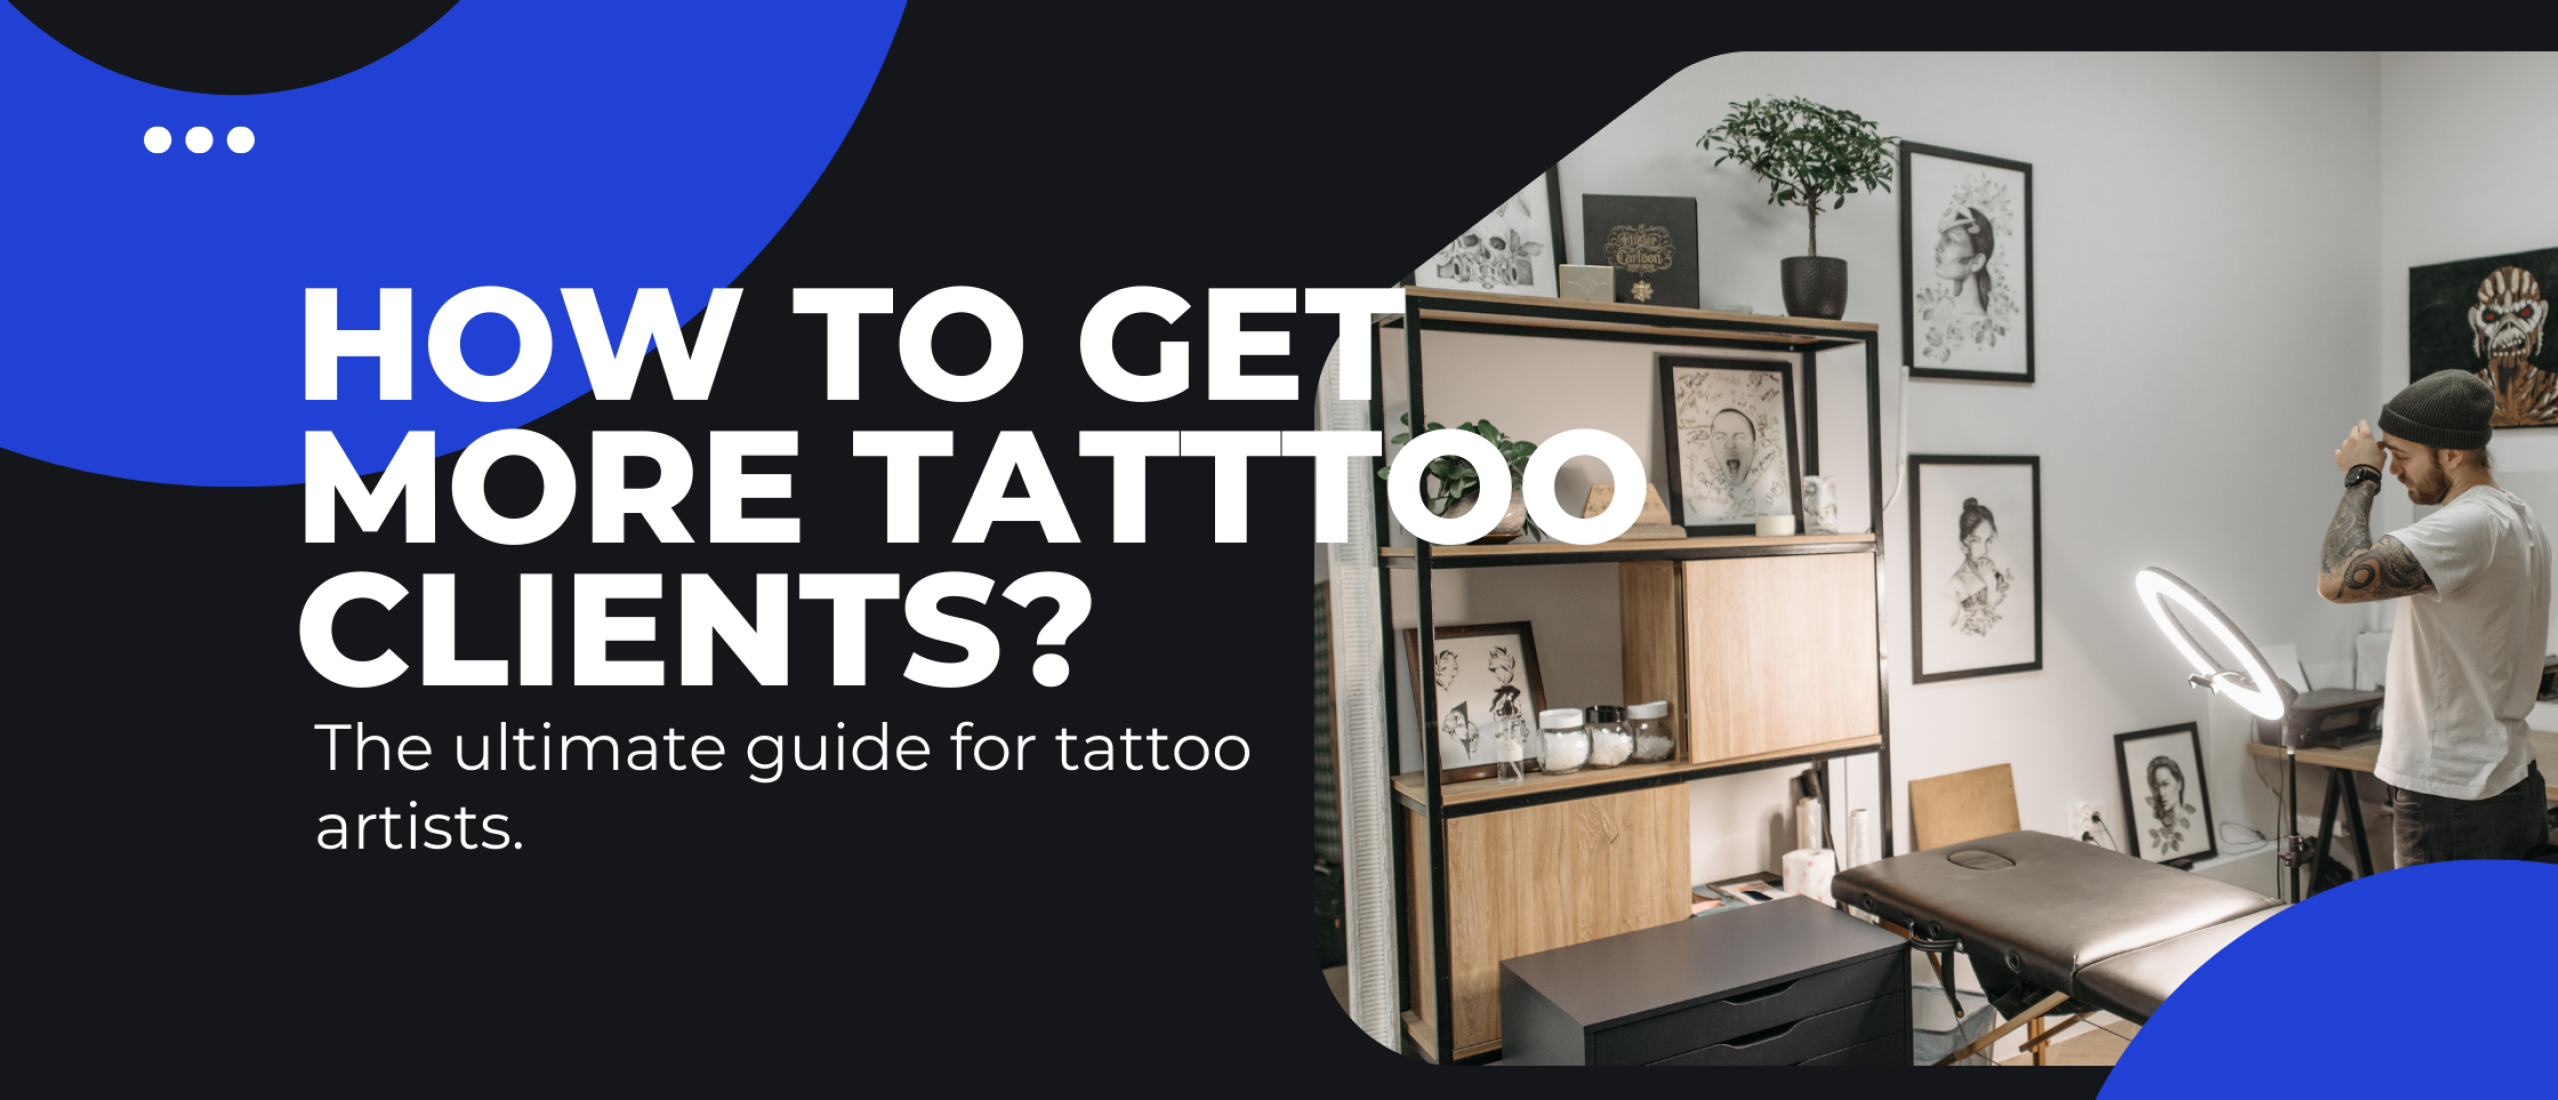 How to get more tattoo clients: The ultimate guide!